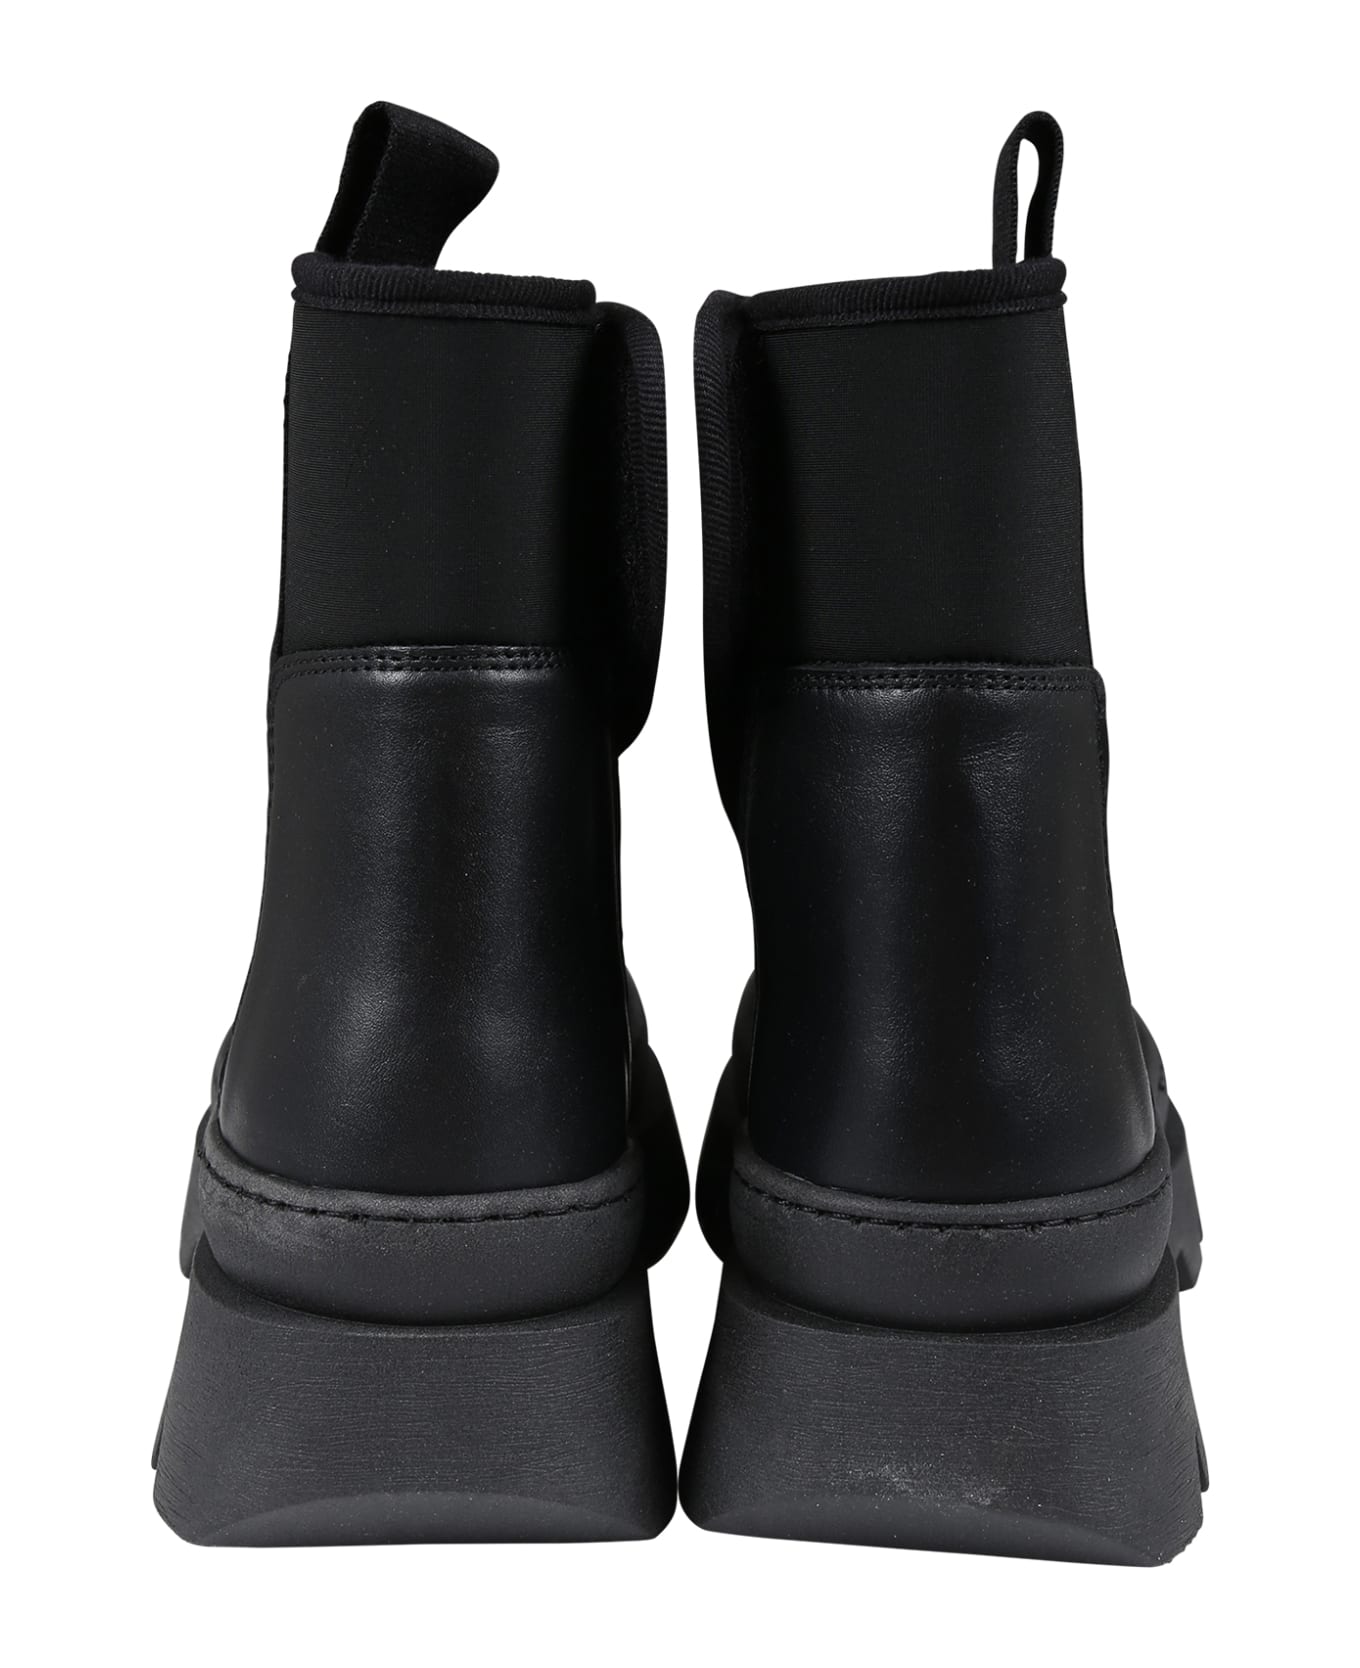 DKNY Black Ankle Boots For Girl With Logo - Black シューズ